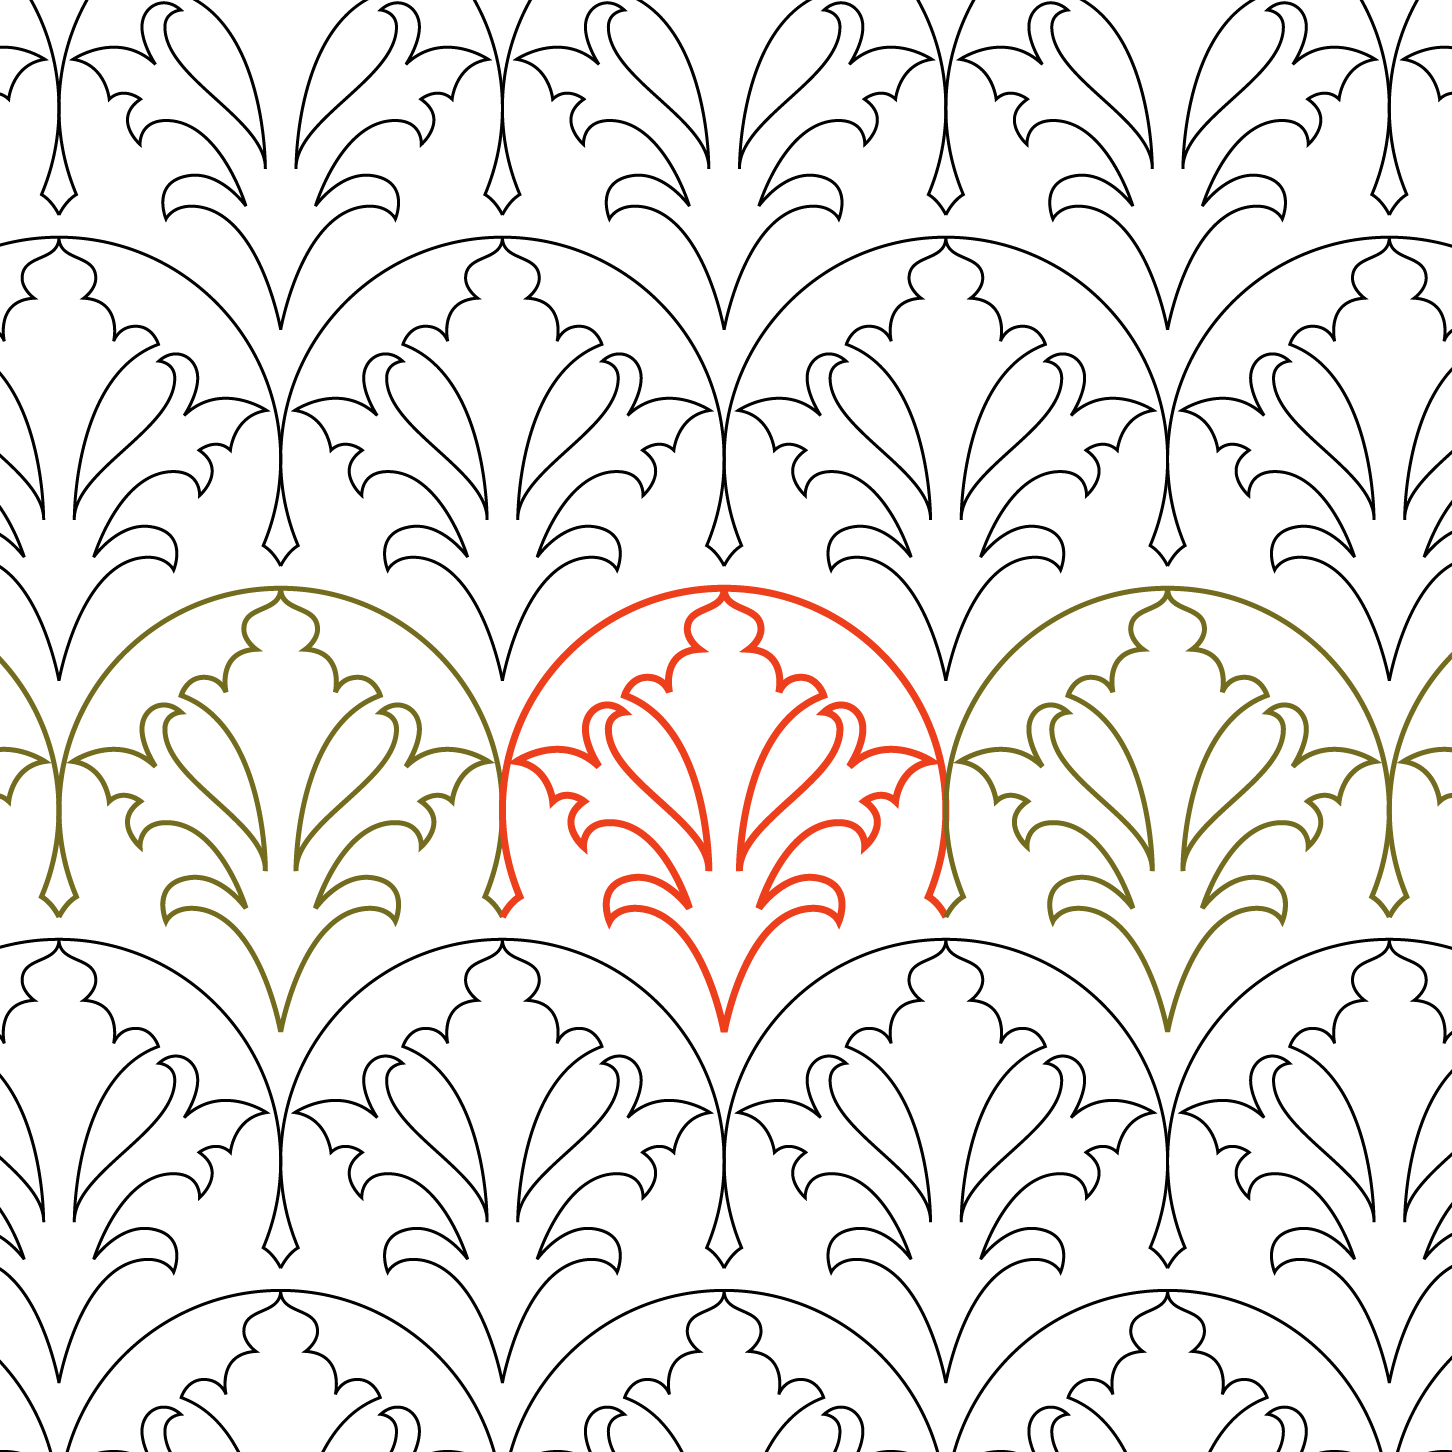 Image of a repeating pattern resembling a fleur-de-lis in a clamshell